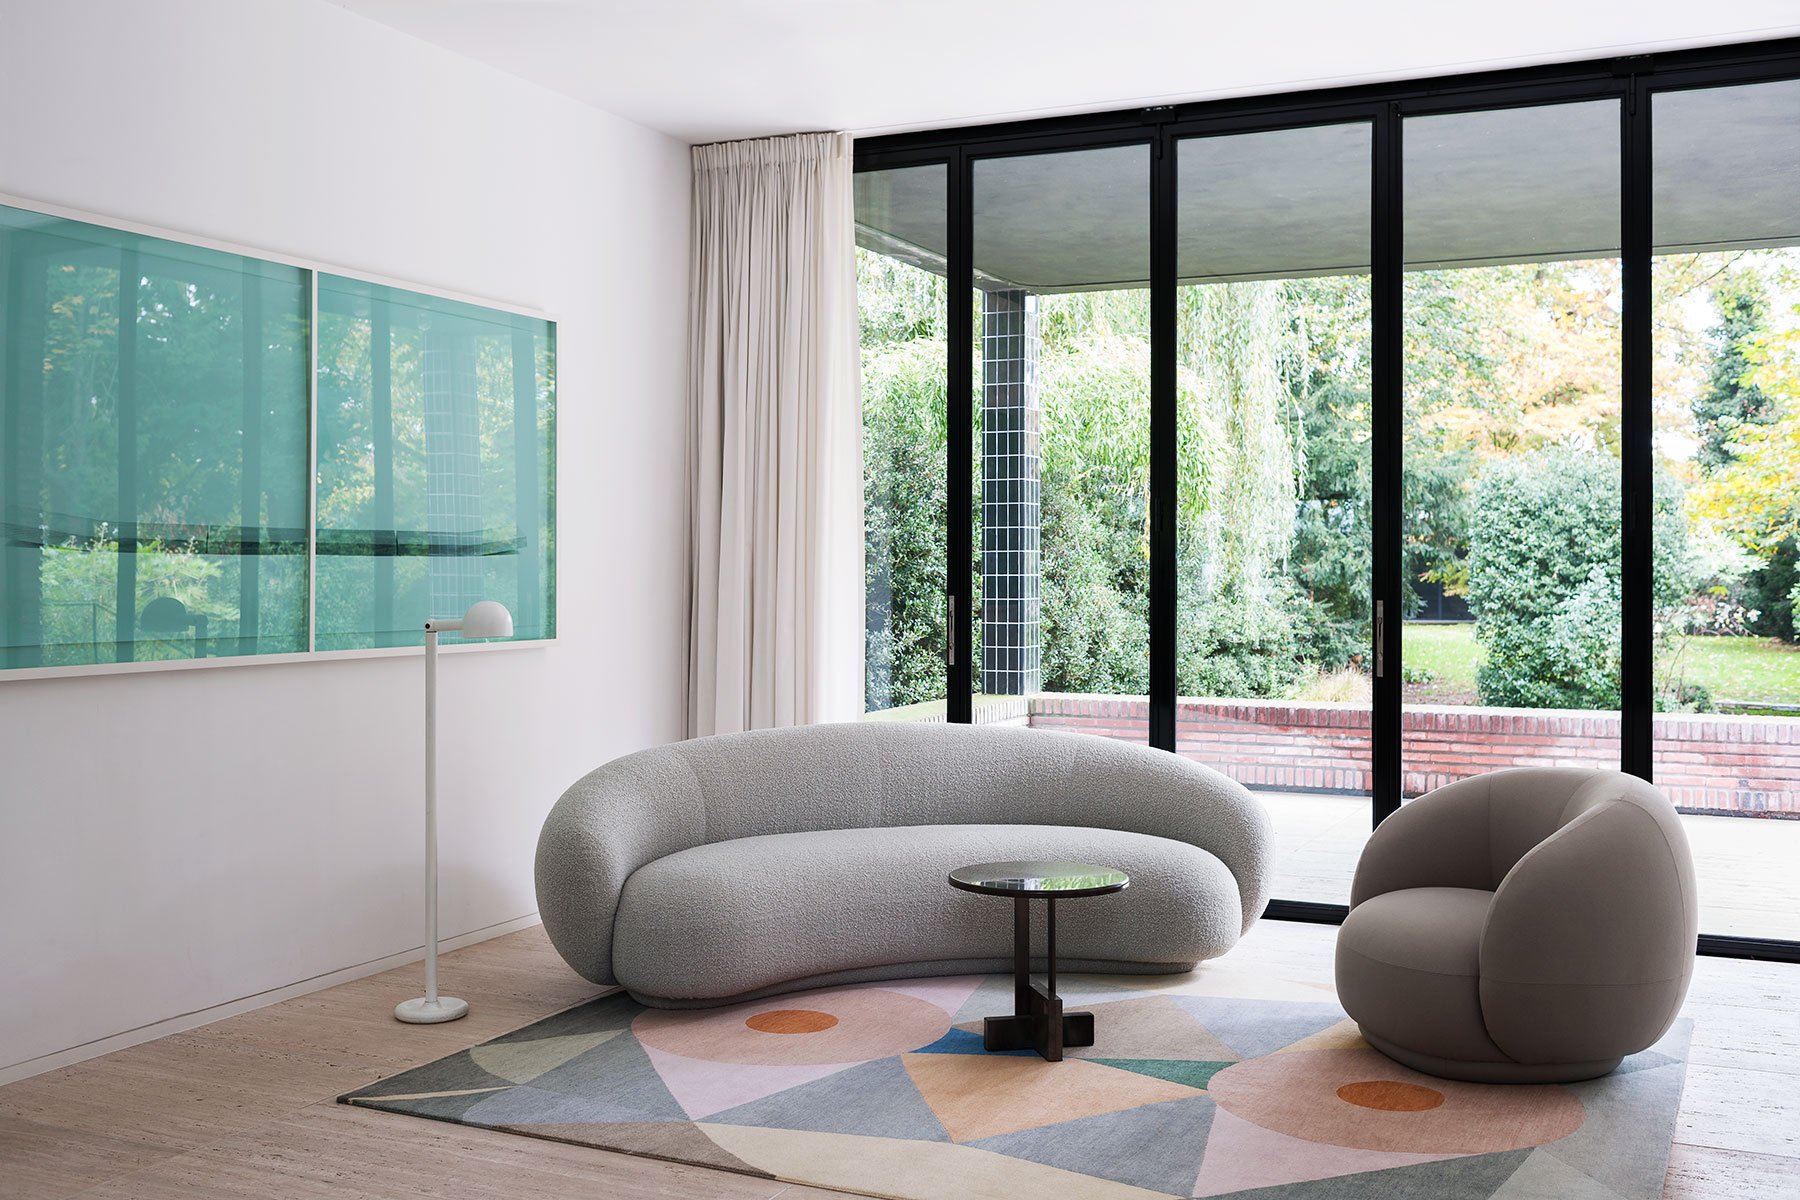 Julep Armchair from Tacchini, designed by Jonas Wagell